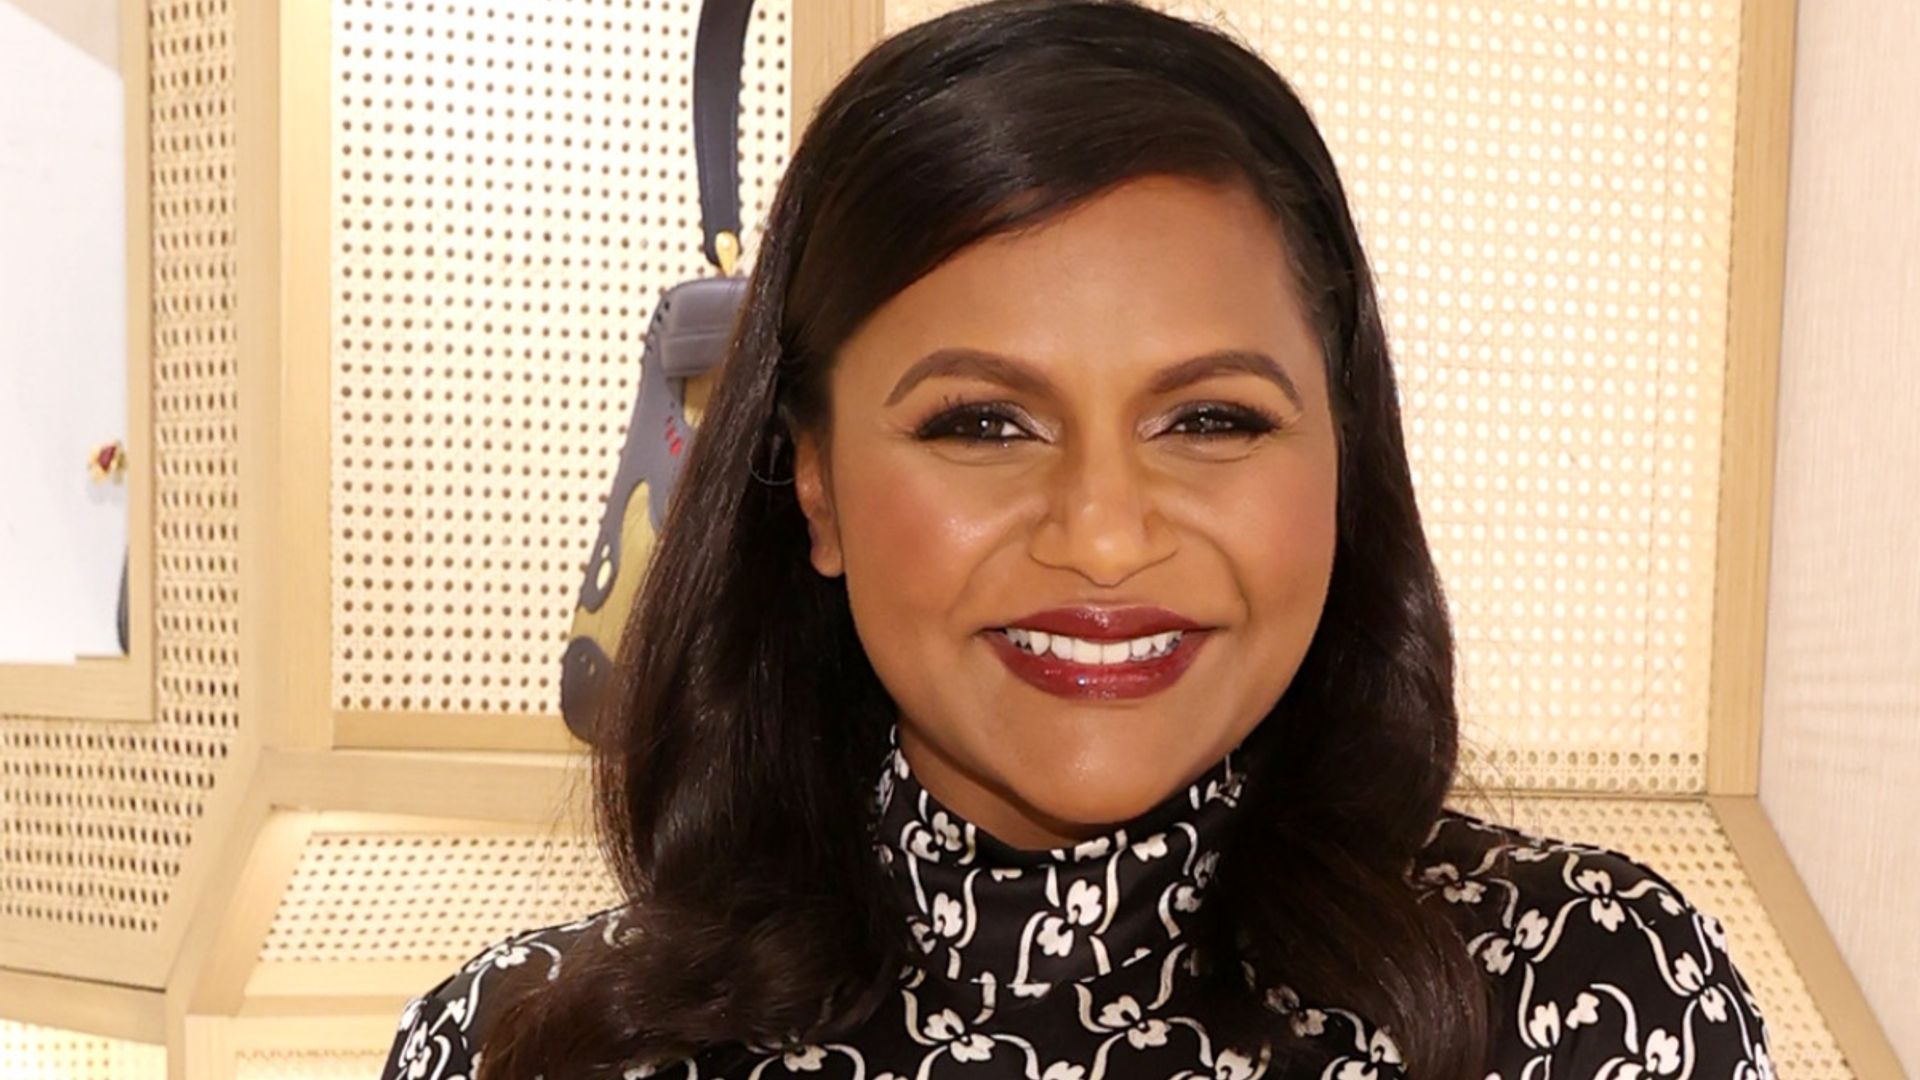 Mindy Kaling's revealing Halloween throwback leaves fans and famous friends stunned